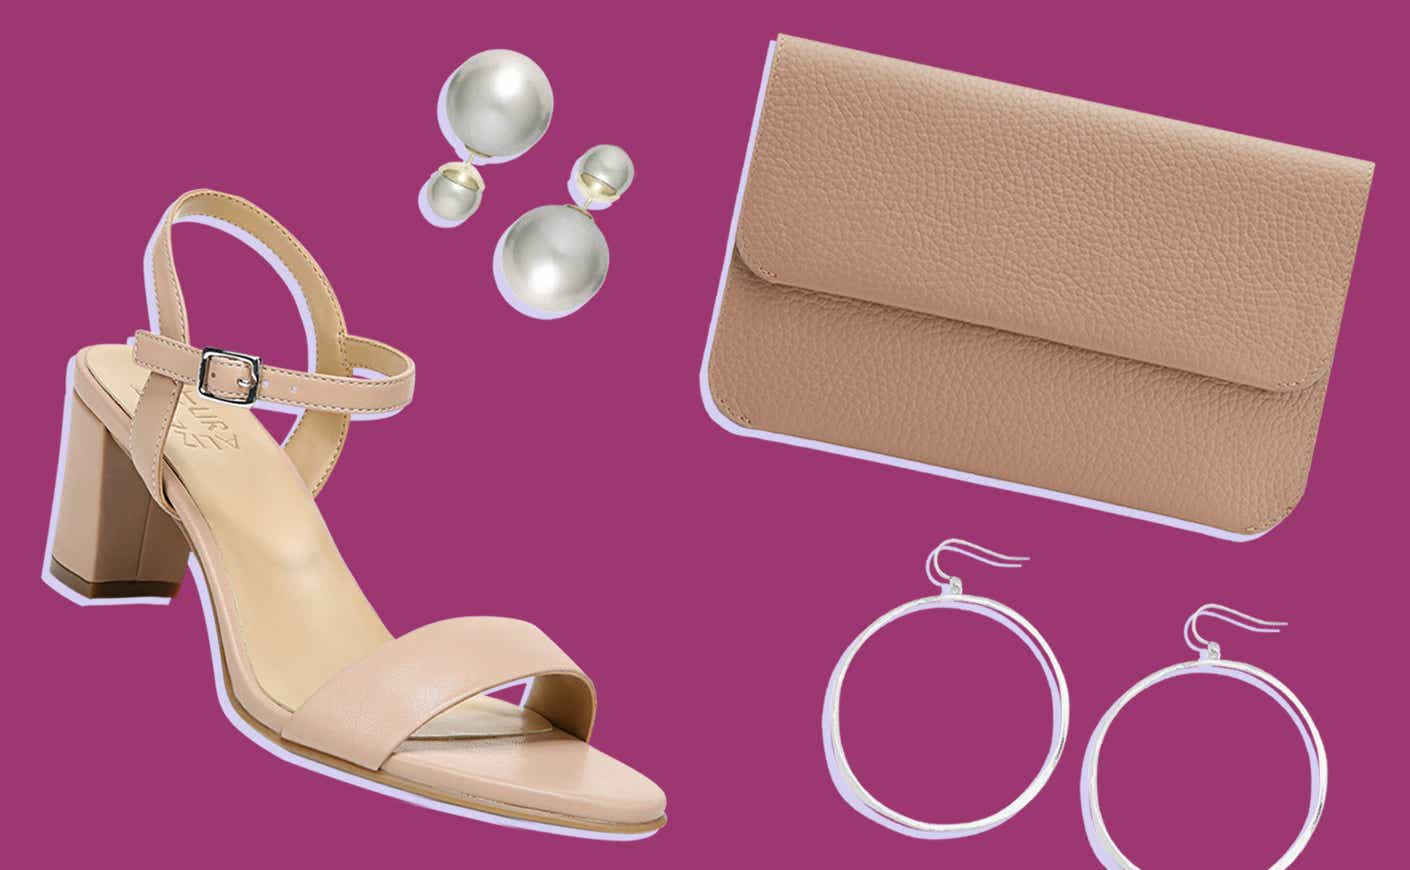 spring accessories against a purple background